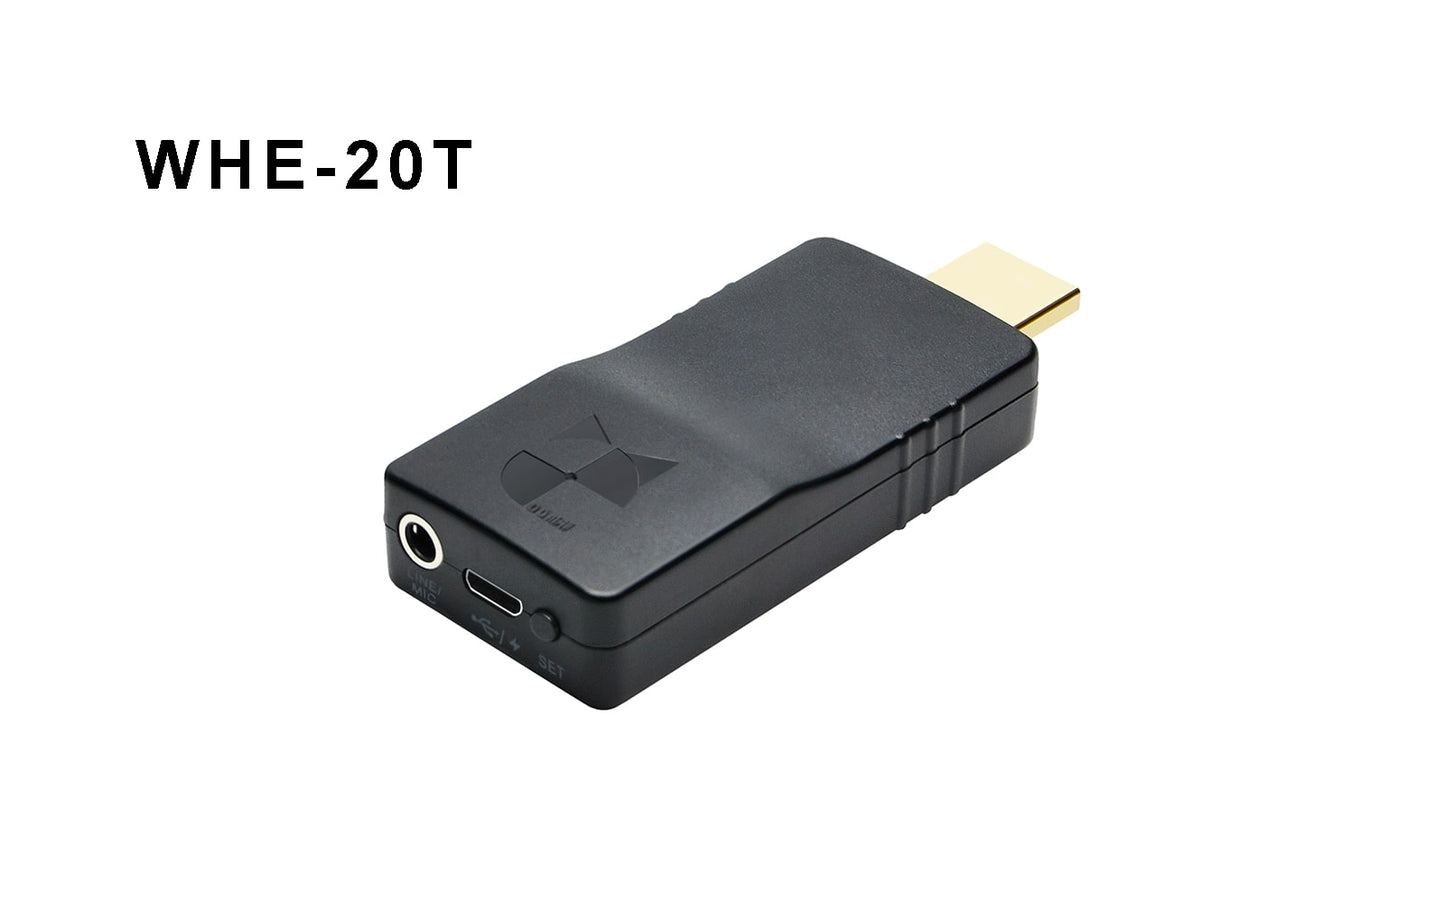 whe-20t 4k wireless hdmi extender tranmitter